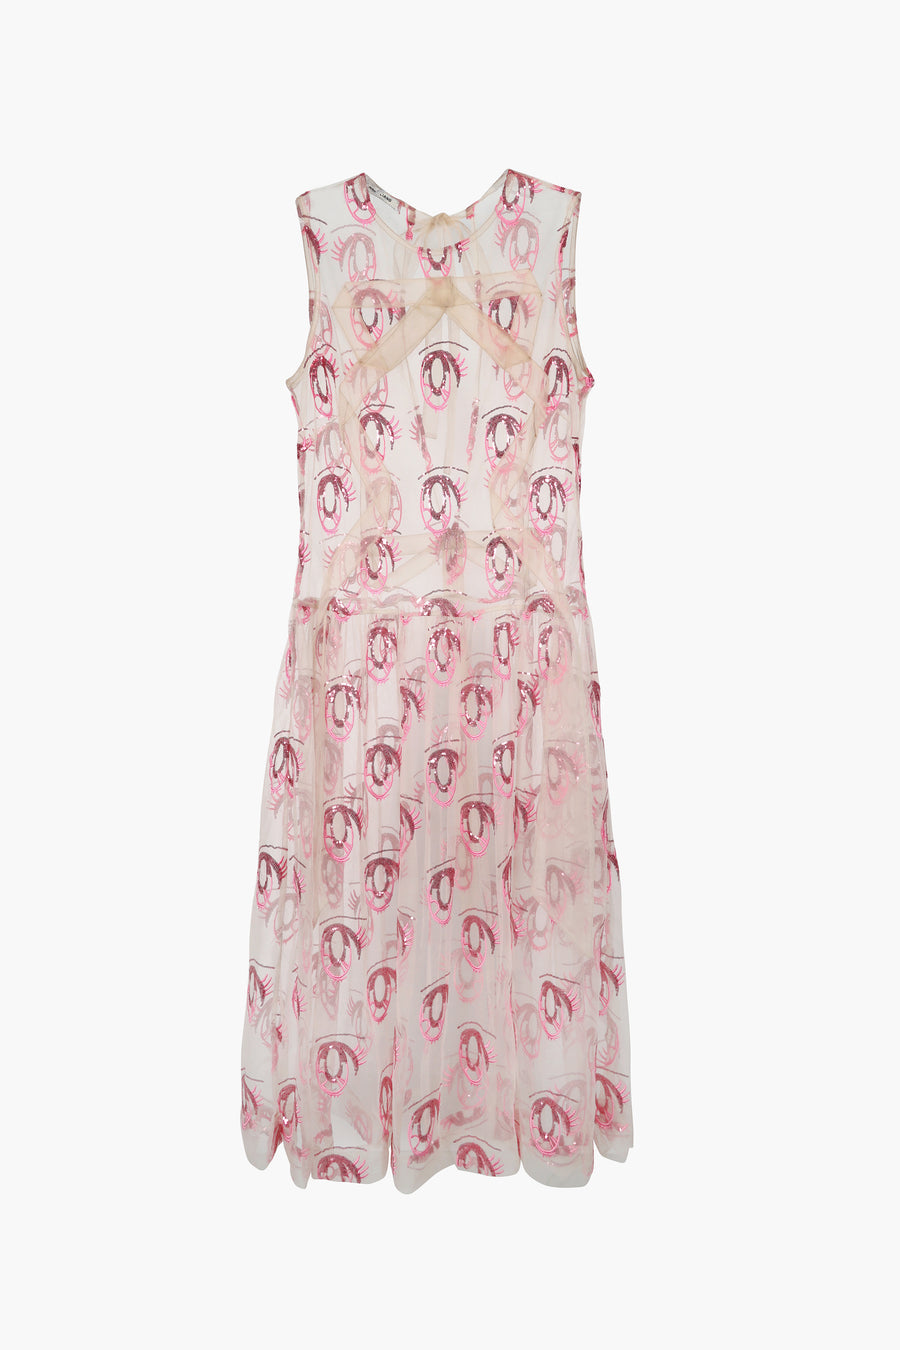 Midi length dress in pink tulle with anime eye print